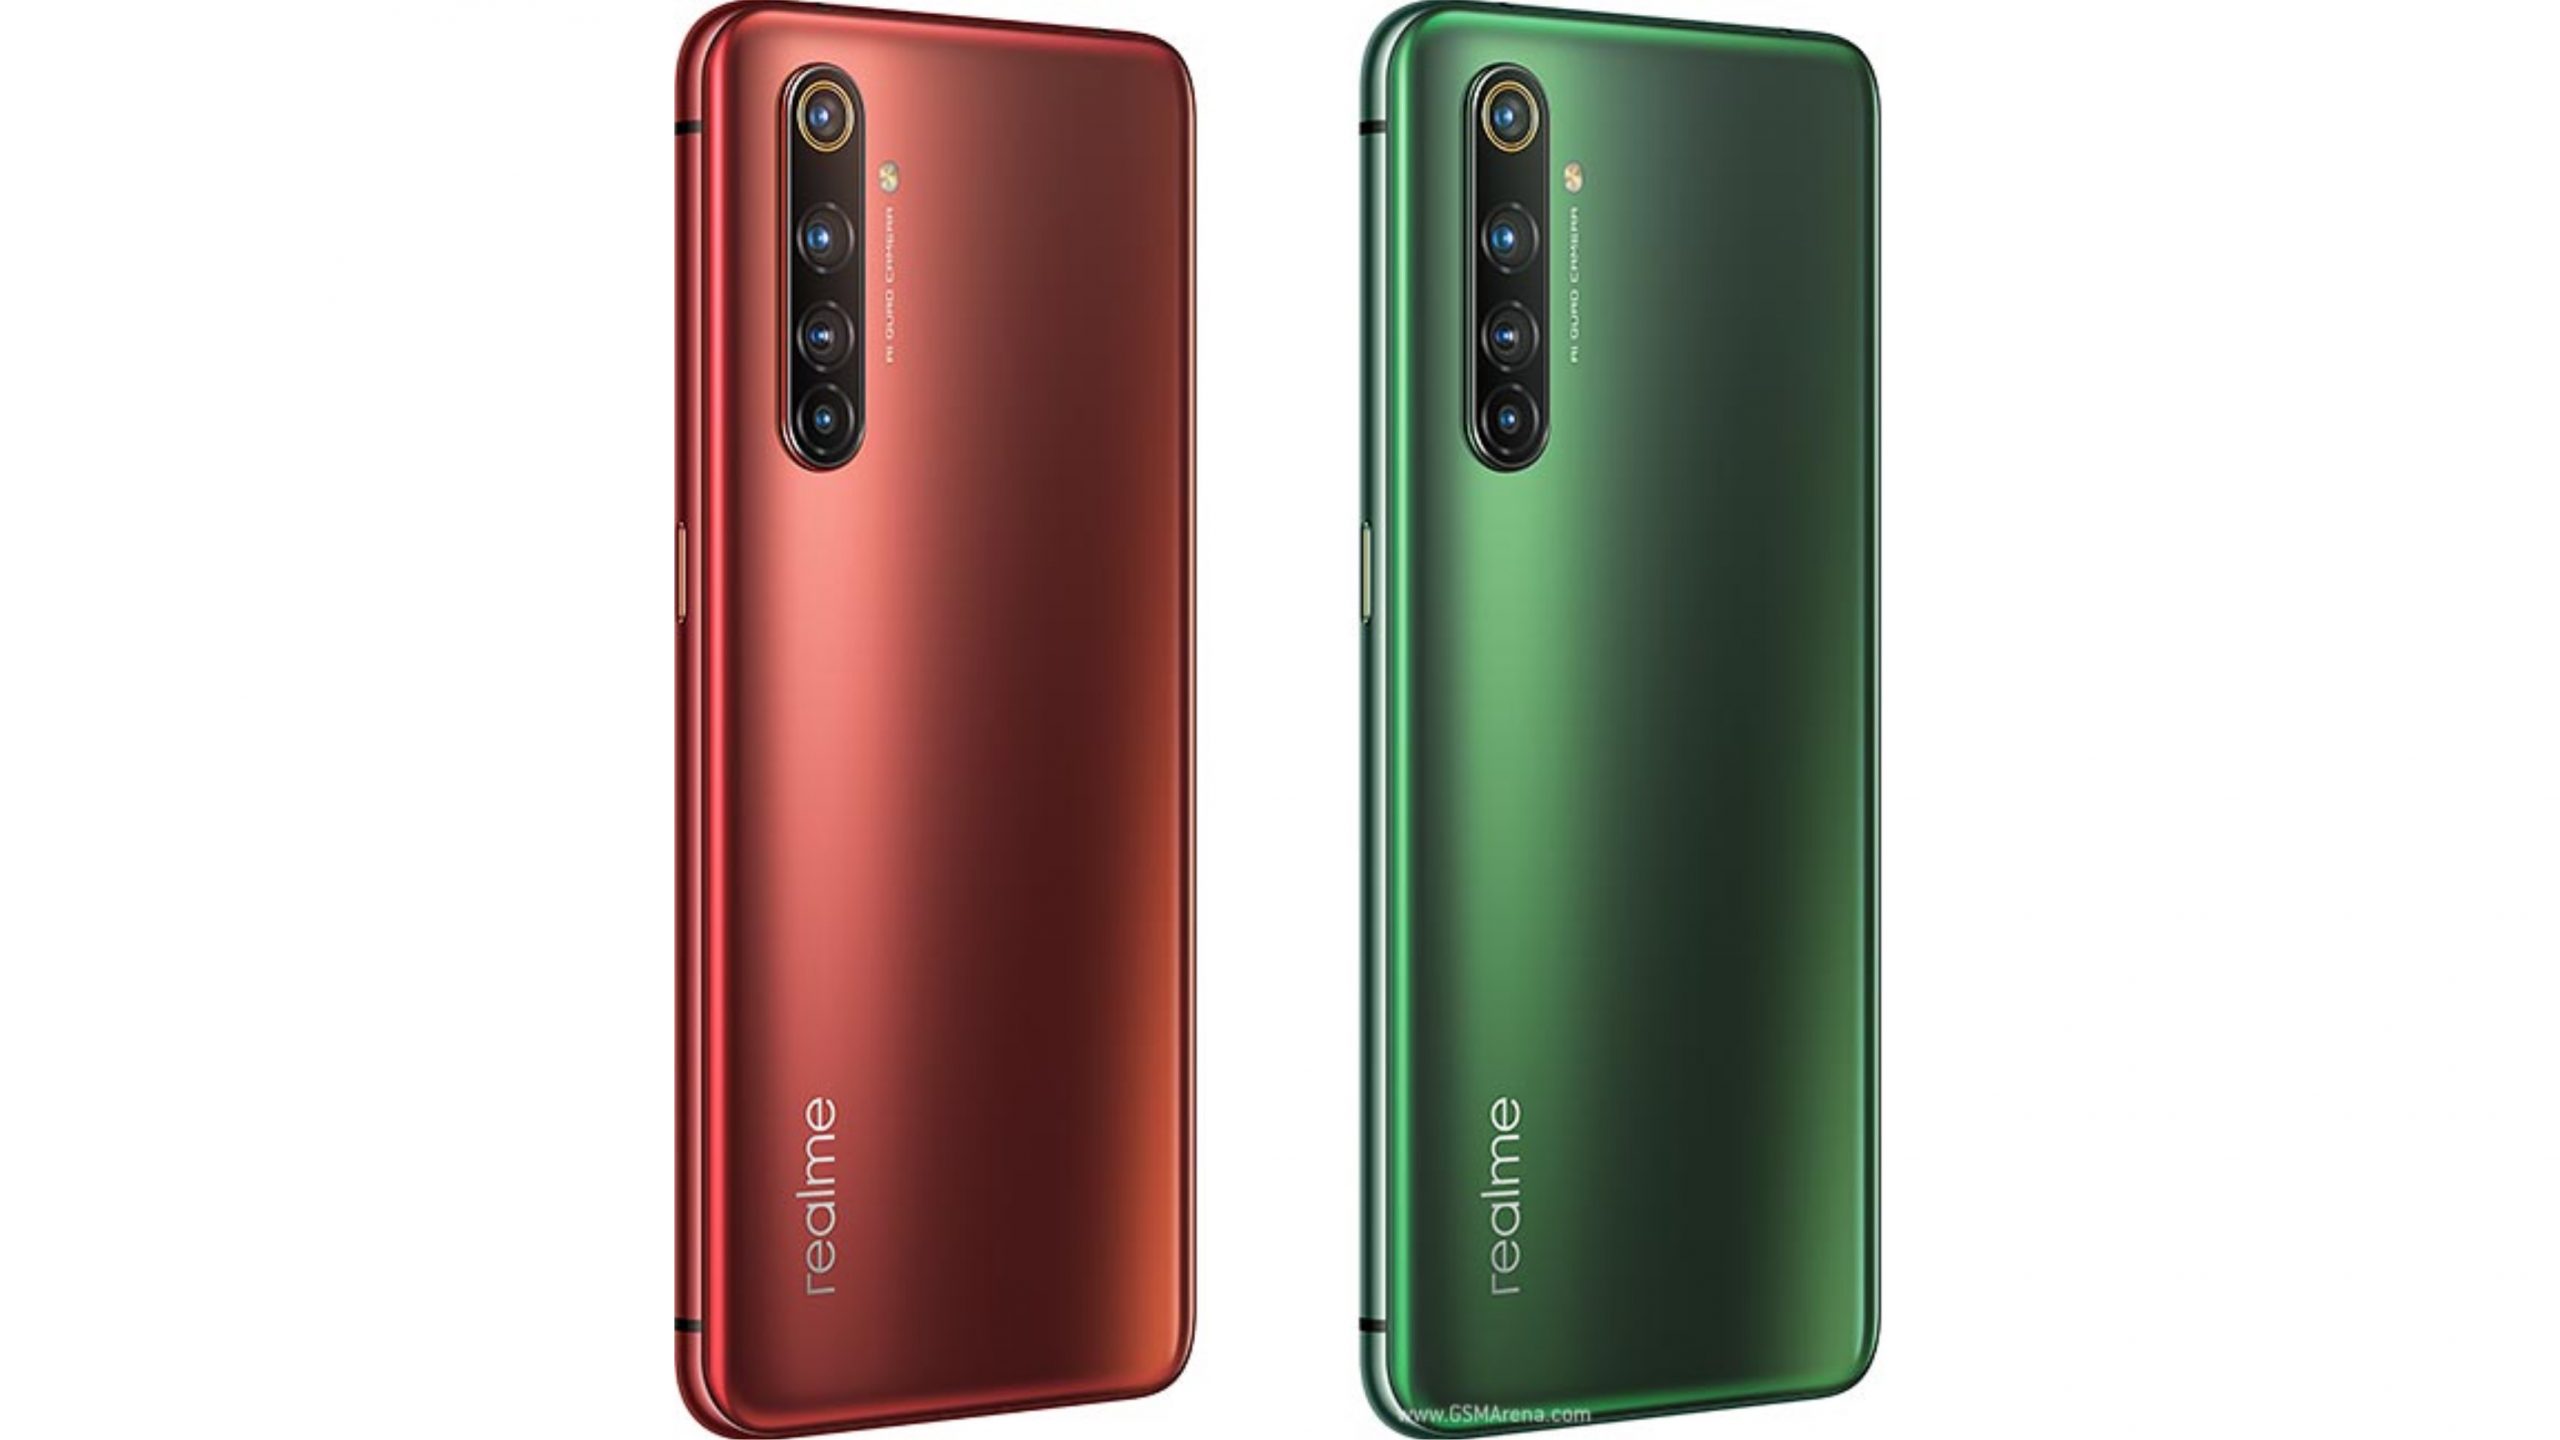 Realme X50 Pro 5G Price in Pakistan and Specs